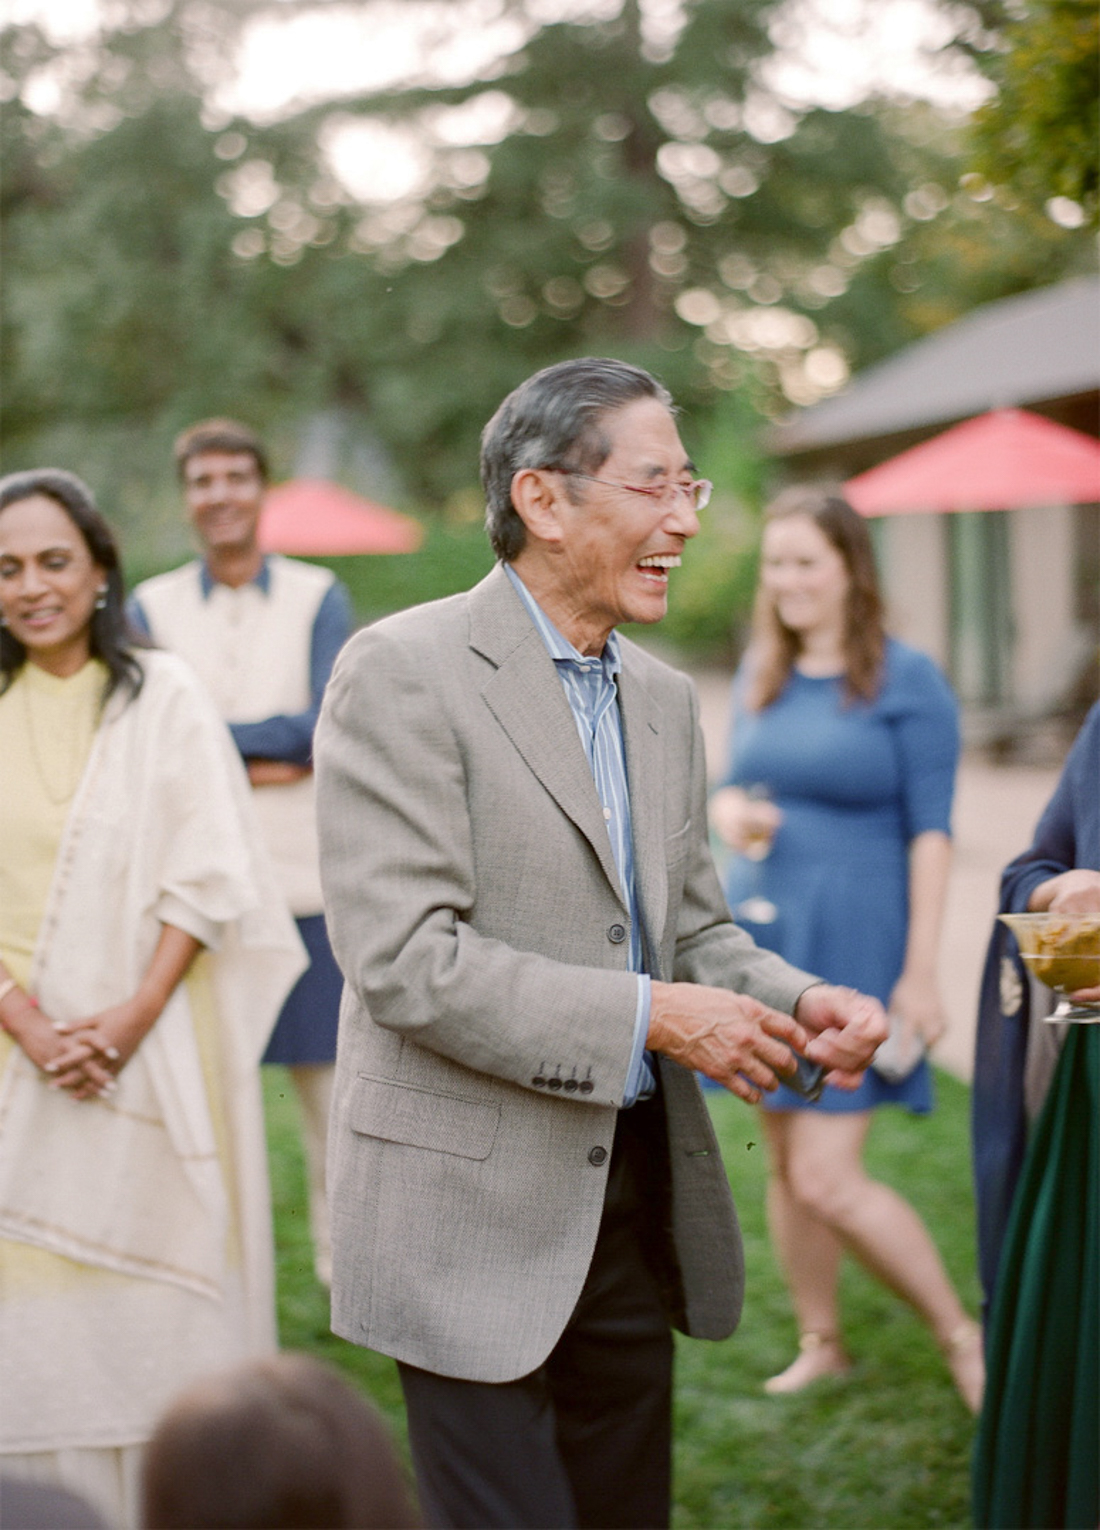 The bride's father laughs as turmeric paste is handed to him to apply to his daughter in an outdoor haldi ceremony in Napa Valley. 